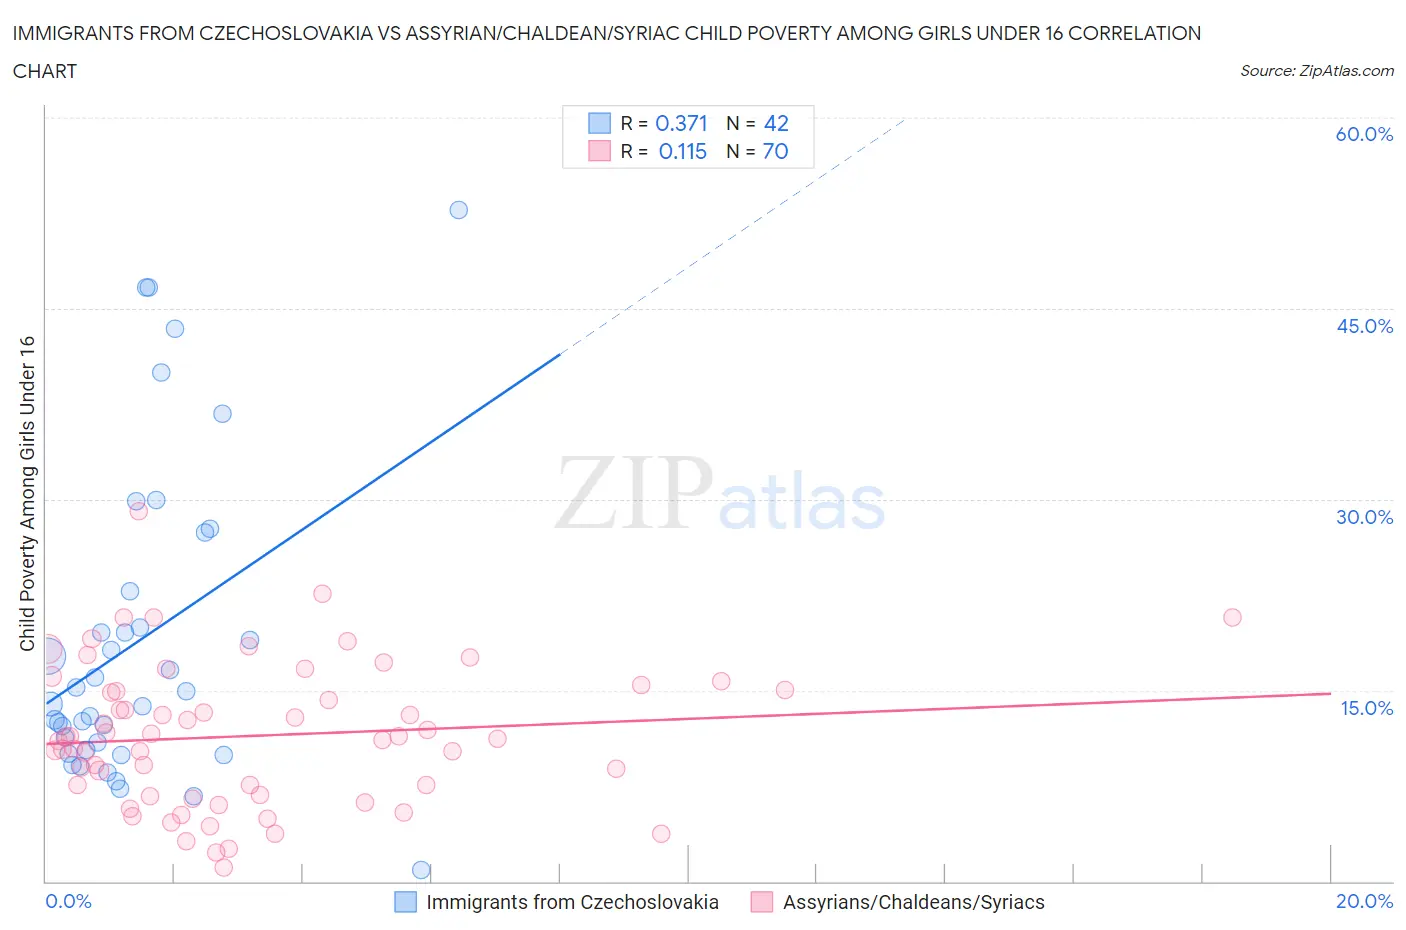 Immigrants from Czechoslovakia vs Assyrian/Chaldean/Syriac Child Poverty Among Girls Under 16